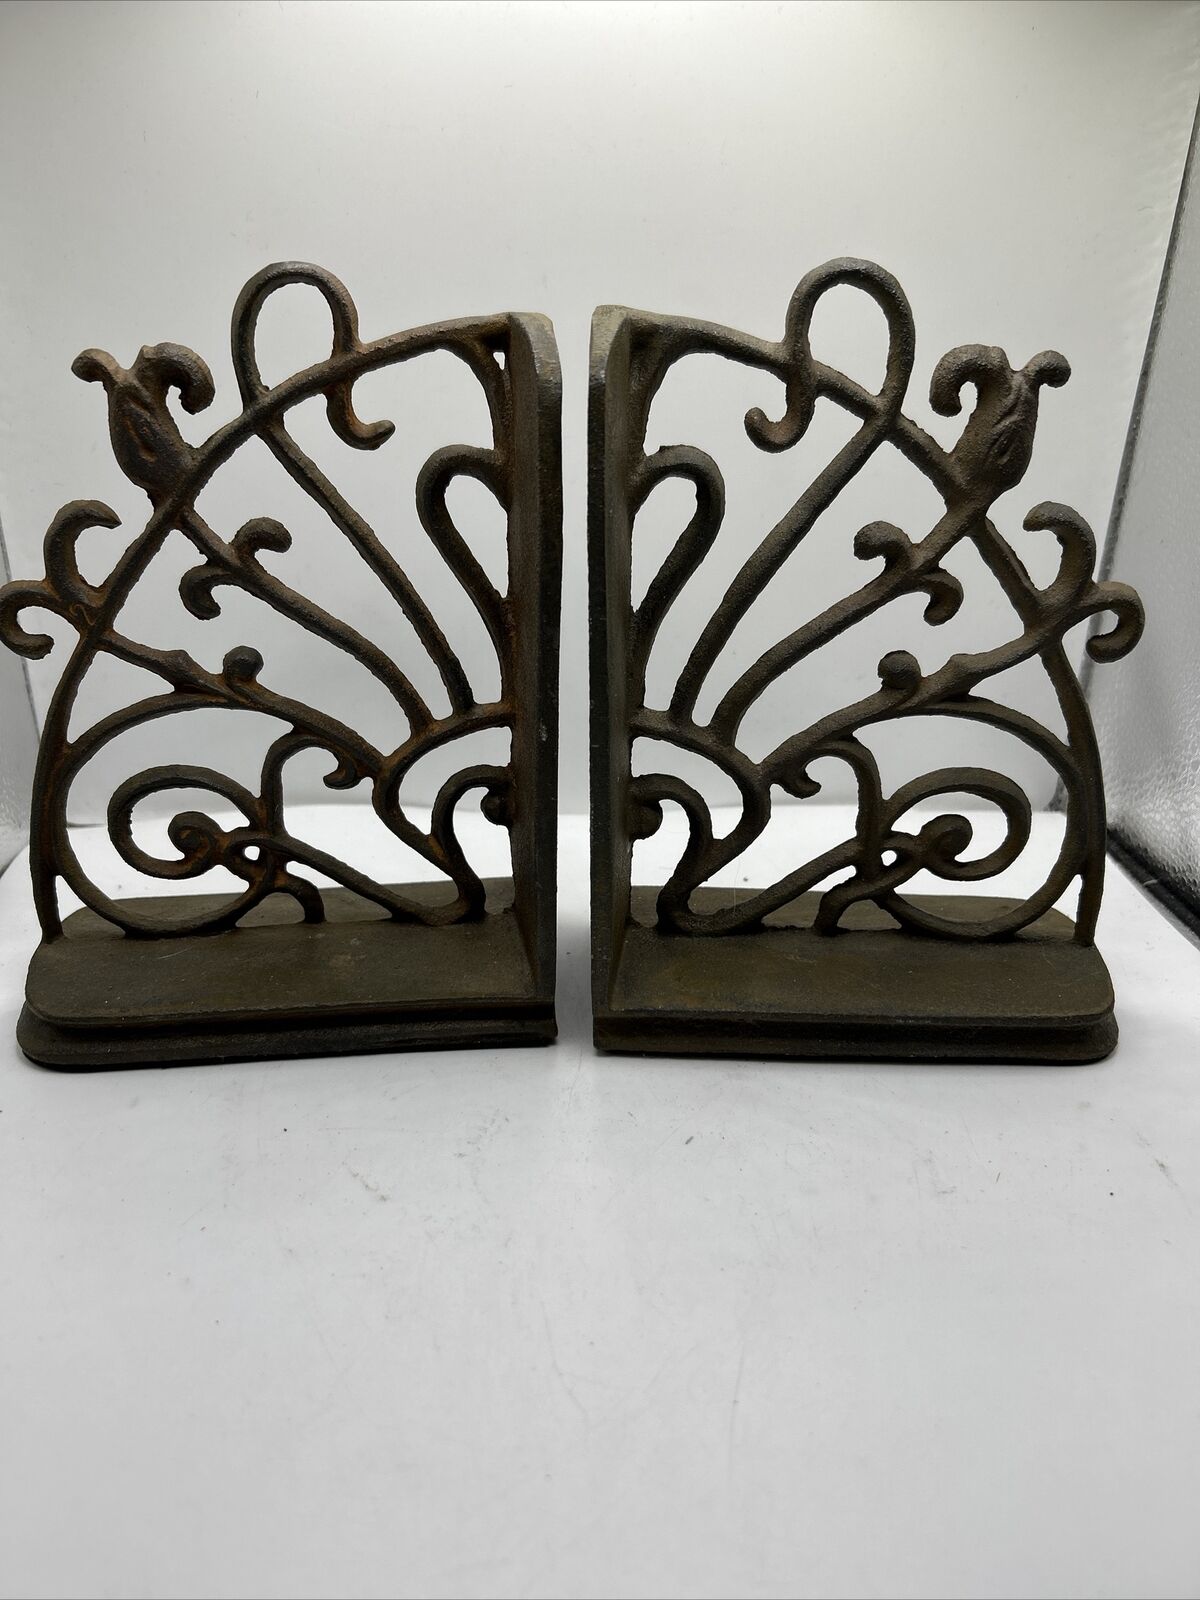 Vintage Cast Iron Bookends Pair Scroll 5x7” Over 3lbs Each Rubber Pad On Base